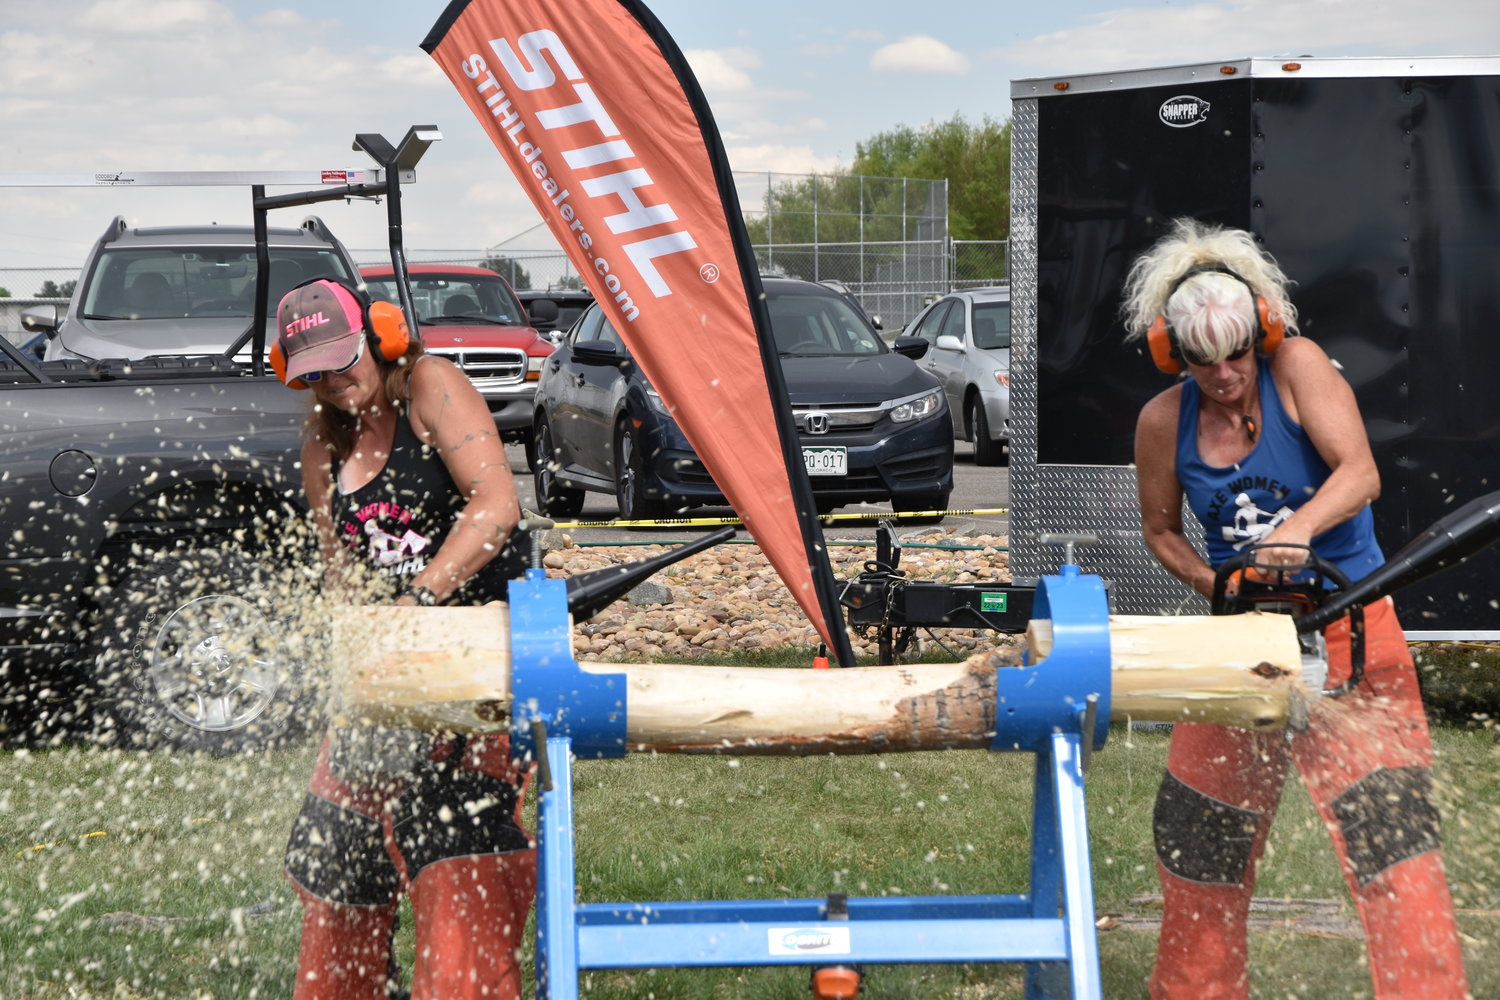 Allisa Weatherbee and Andrea Robarge competing who can carve off the end off the tree stump the quickest.